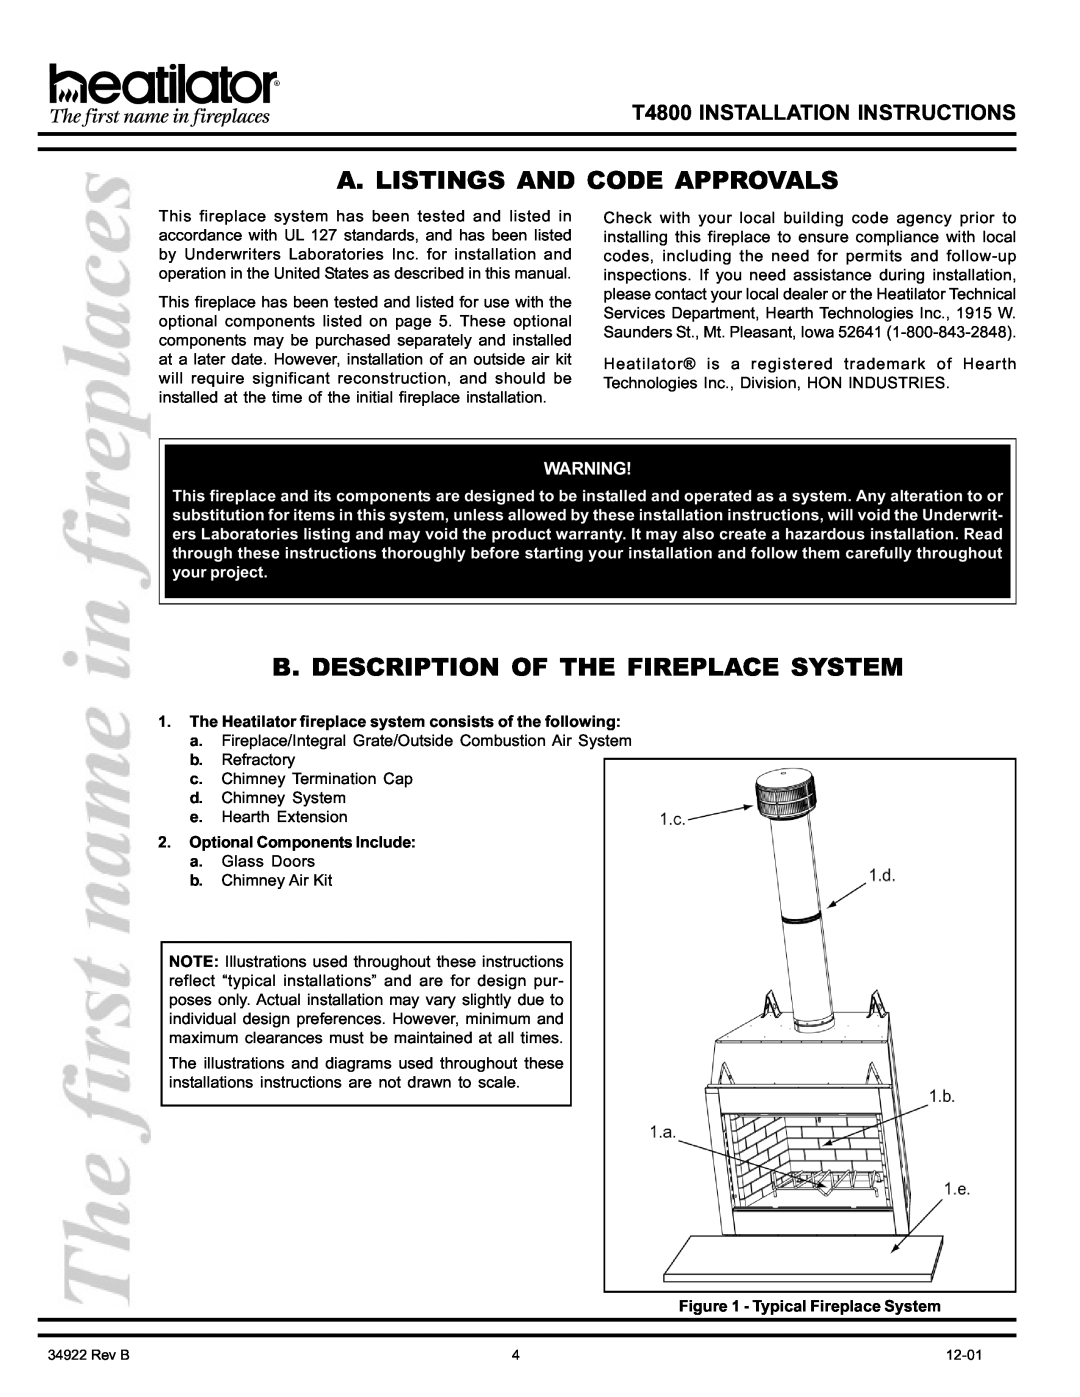 Heatiator T4800 manual A. Listings And Code Approvals, B. Description Of The Fireplace System, Optional Components Include 